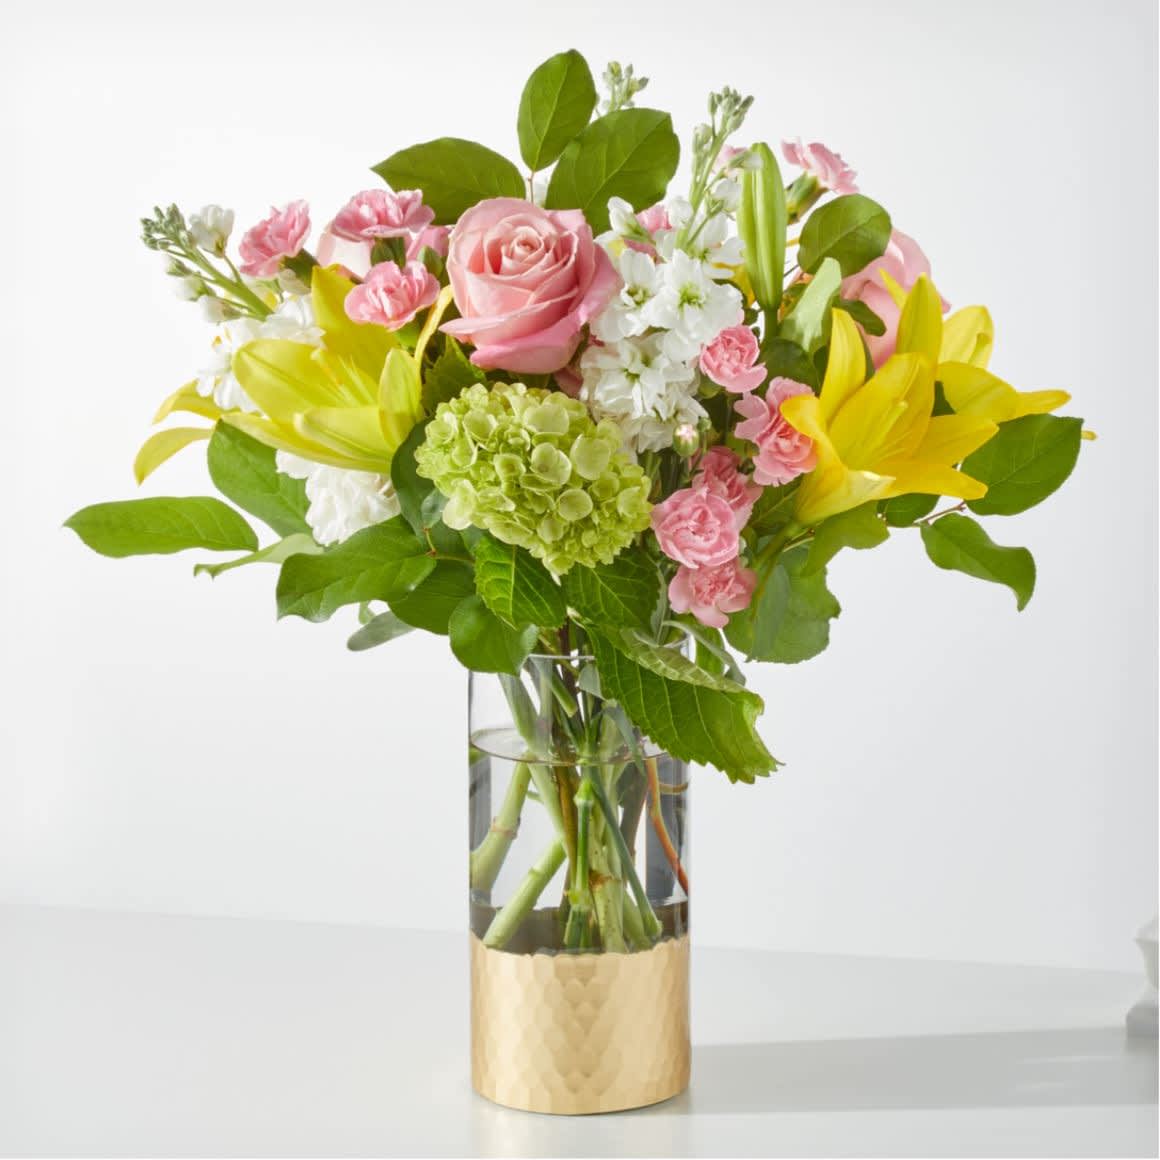 Garden Delight Bouquet - This soft color bouquet will bring some warmth to your home. It will remind you that Spring/Summer is upon us.